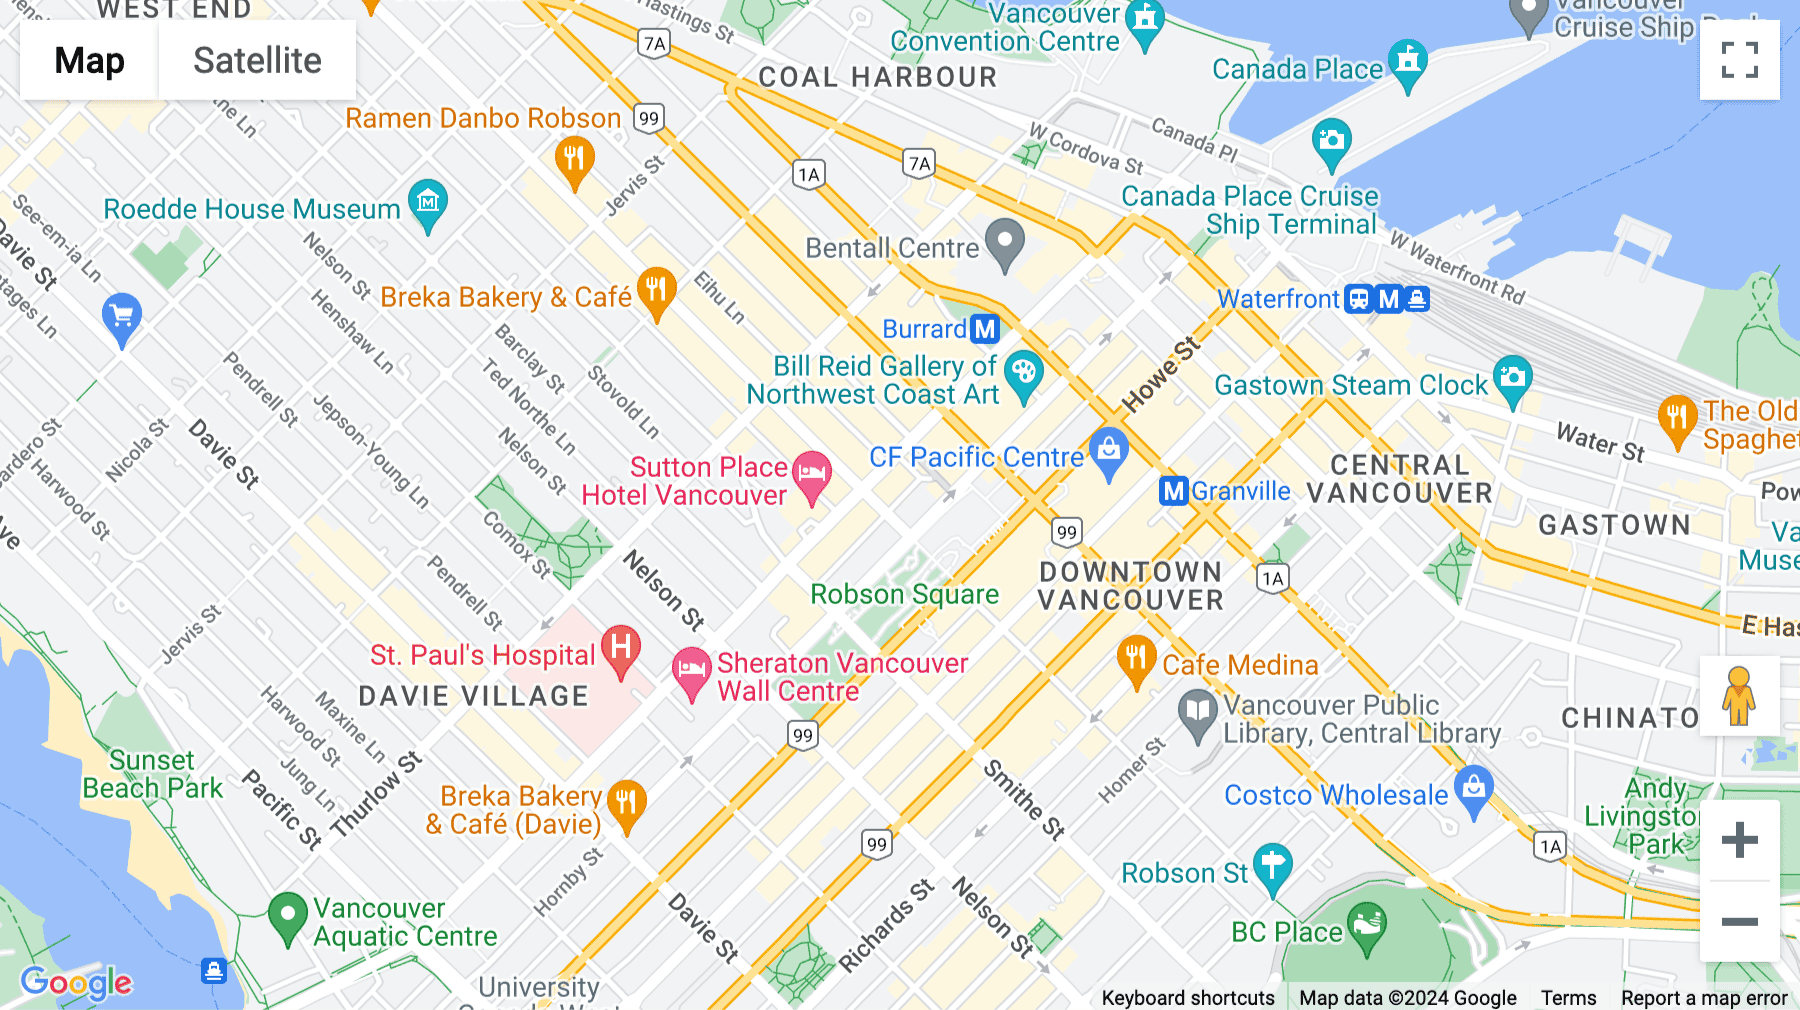 Click for interative map of Robson Square, 777 Hornby Street, Suite 600, Vancouver